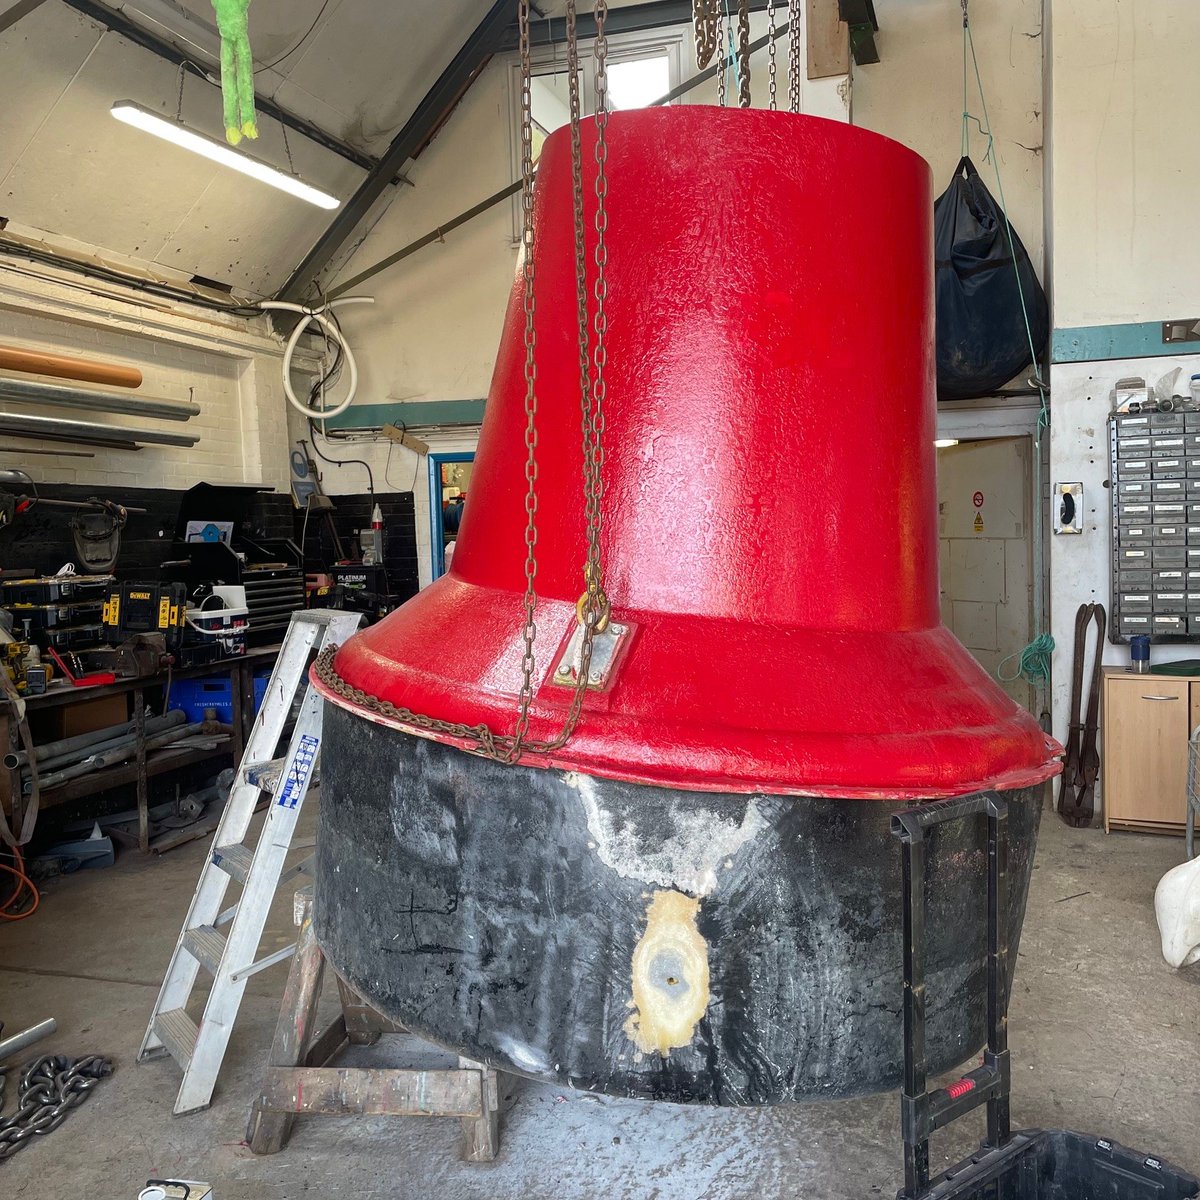 🔴Stocker Buoy🔴 Our Harbour Technicians have been busy this week, preparing a replacement for the Stocker Buoy. Here's a work in progress shot whilst it was in the workshop.